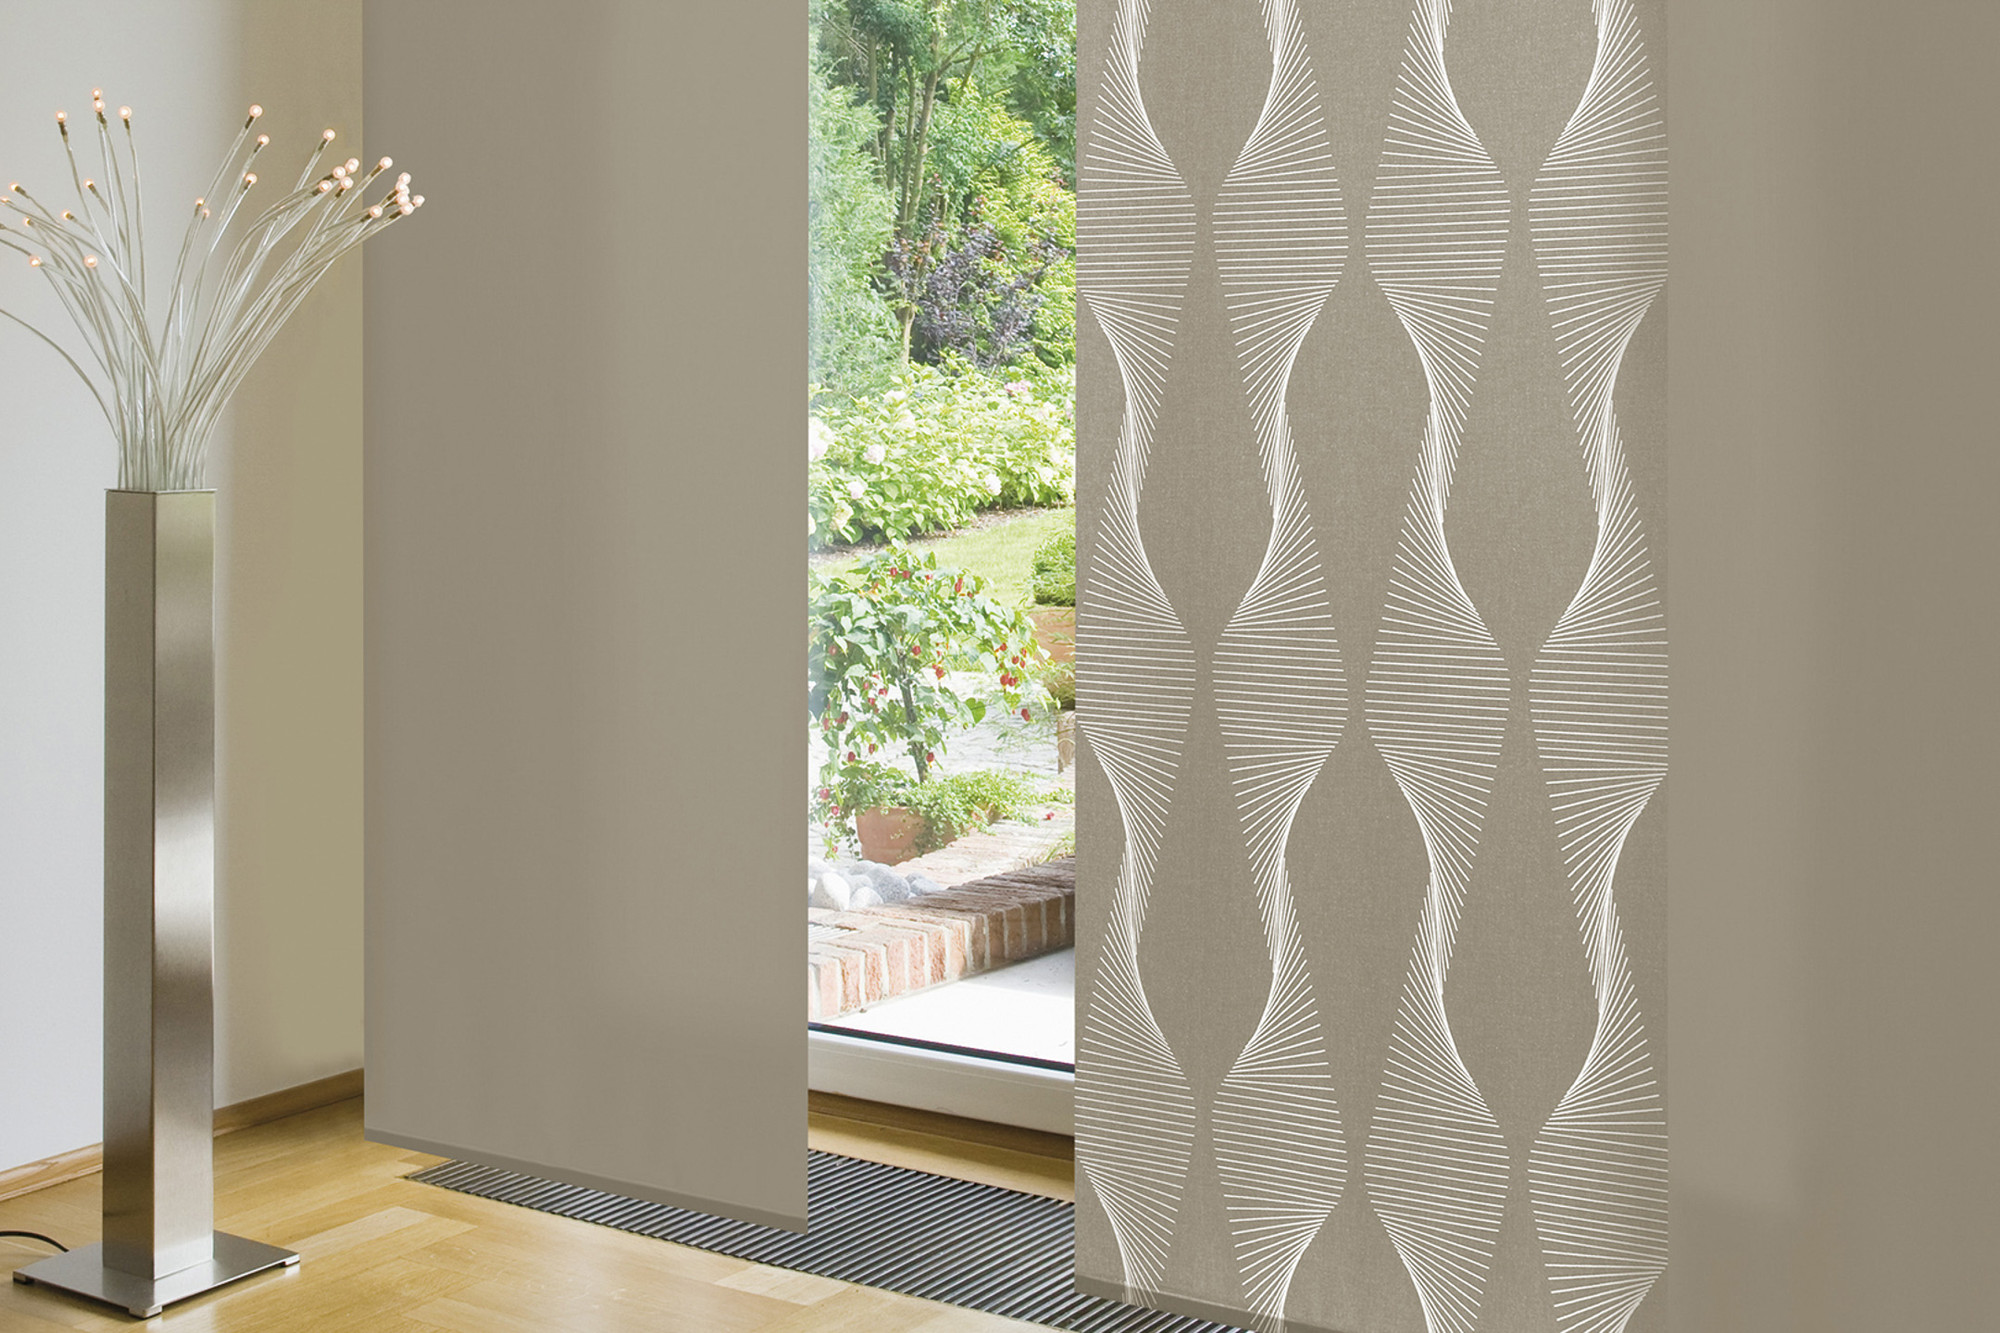 Product: Panel blind